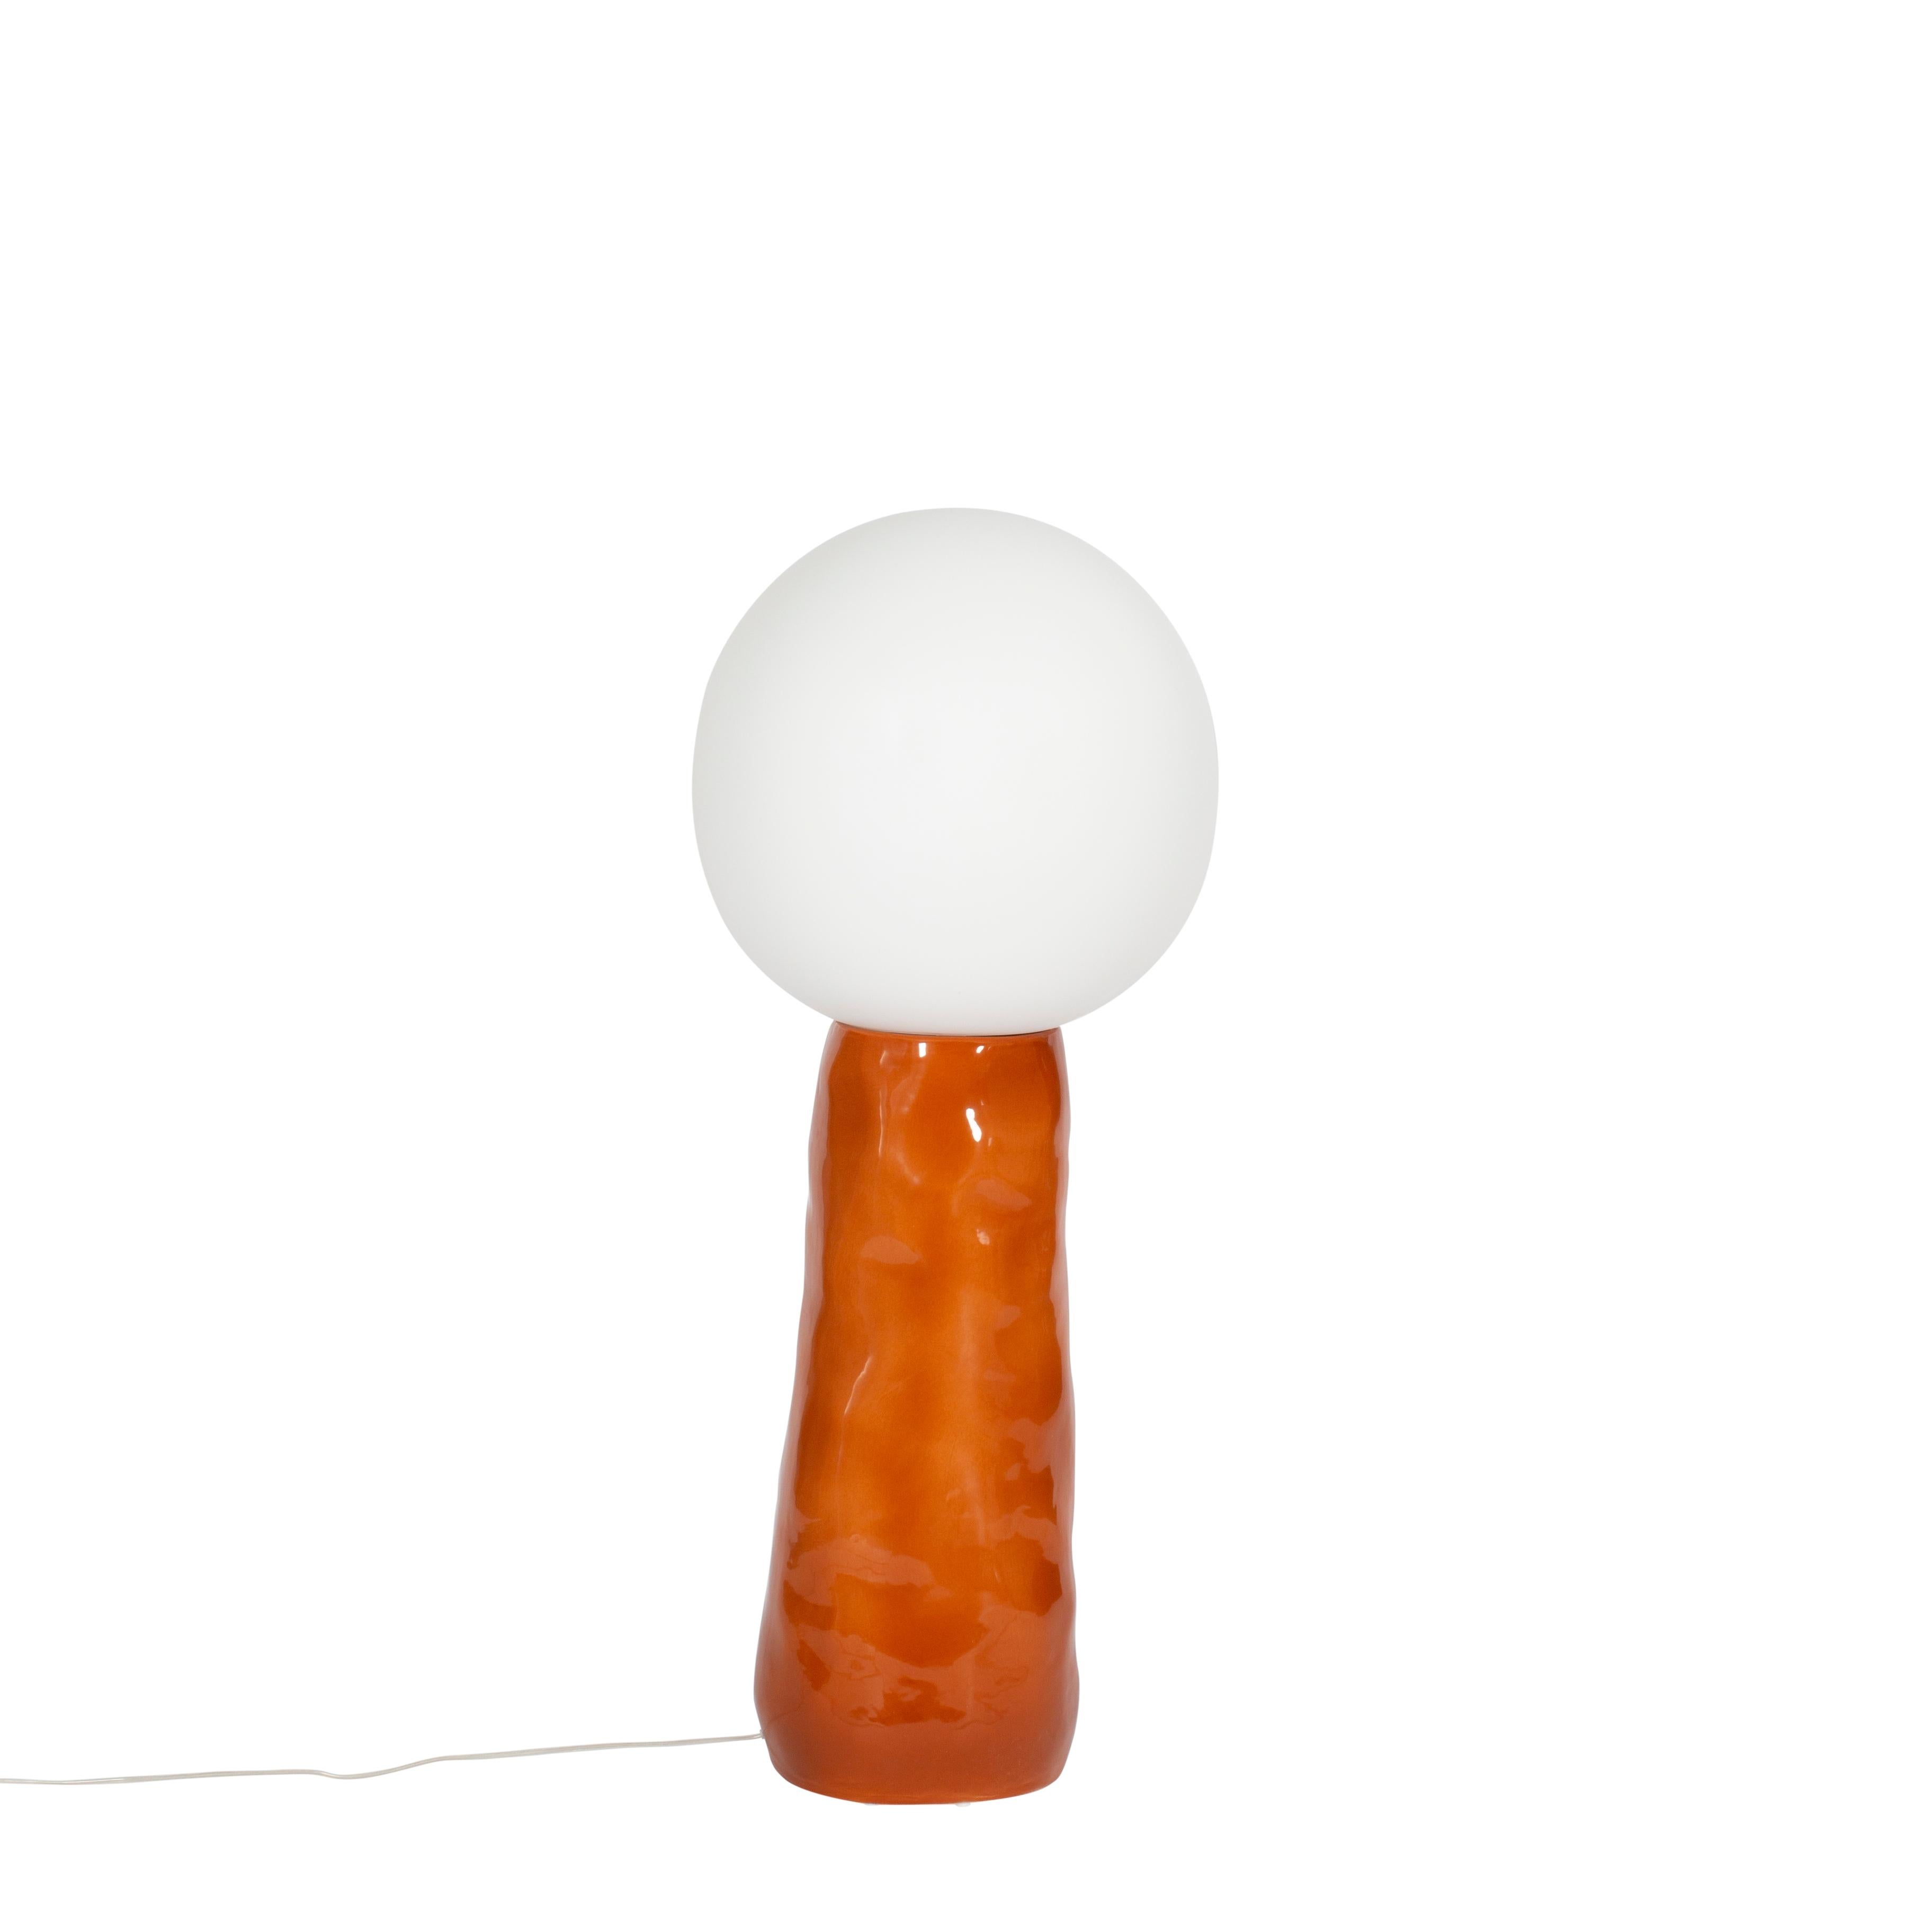 Kokeshi Medium White Acetato Terracotta Floor Lamp by Pulpo
Dimensions: D45 x H112.5 cm
Materials: glass and ceramic

Also available in different finishes: white acetato white, grey acetato white, white acetato grey, grey acetato grey,  white